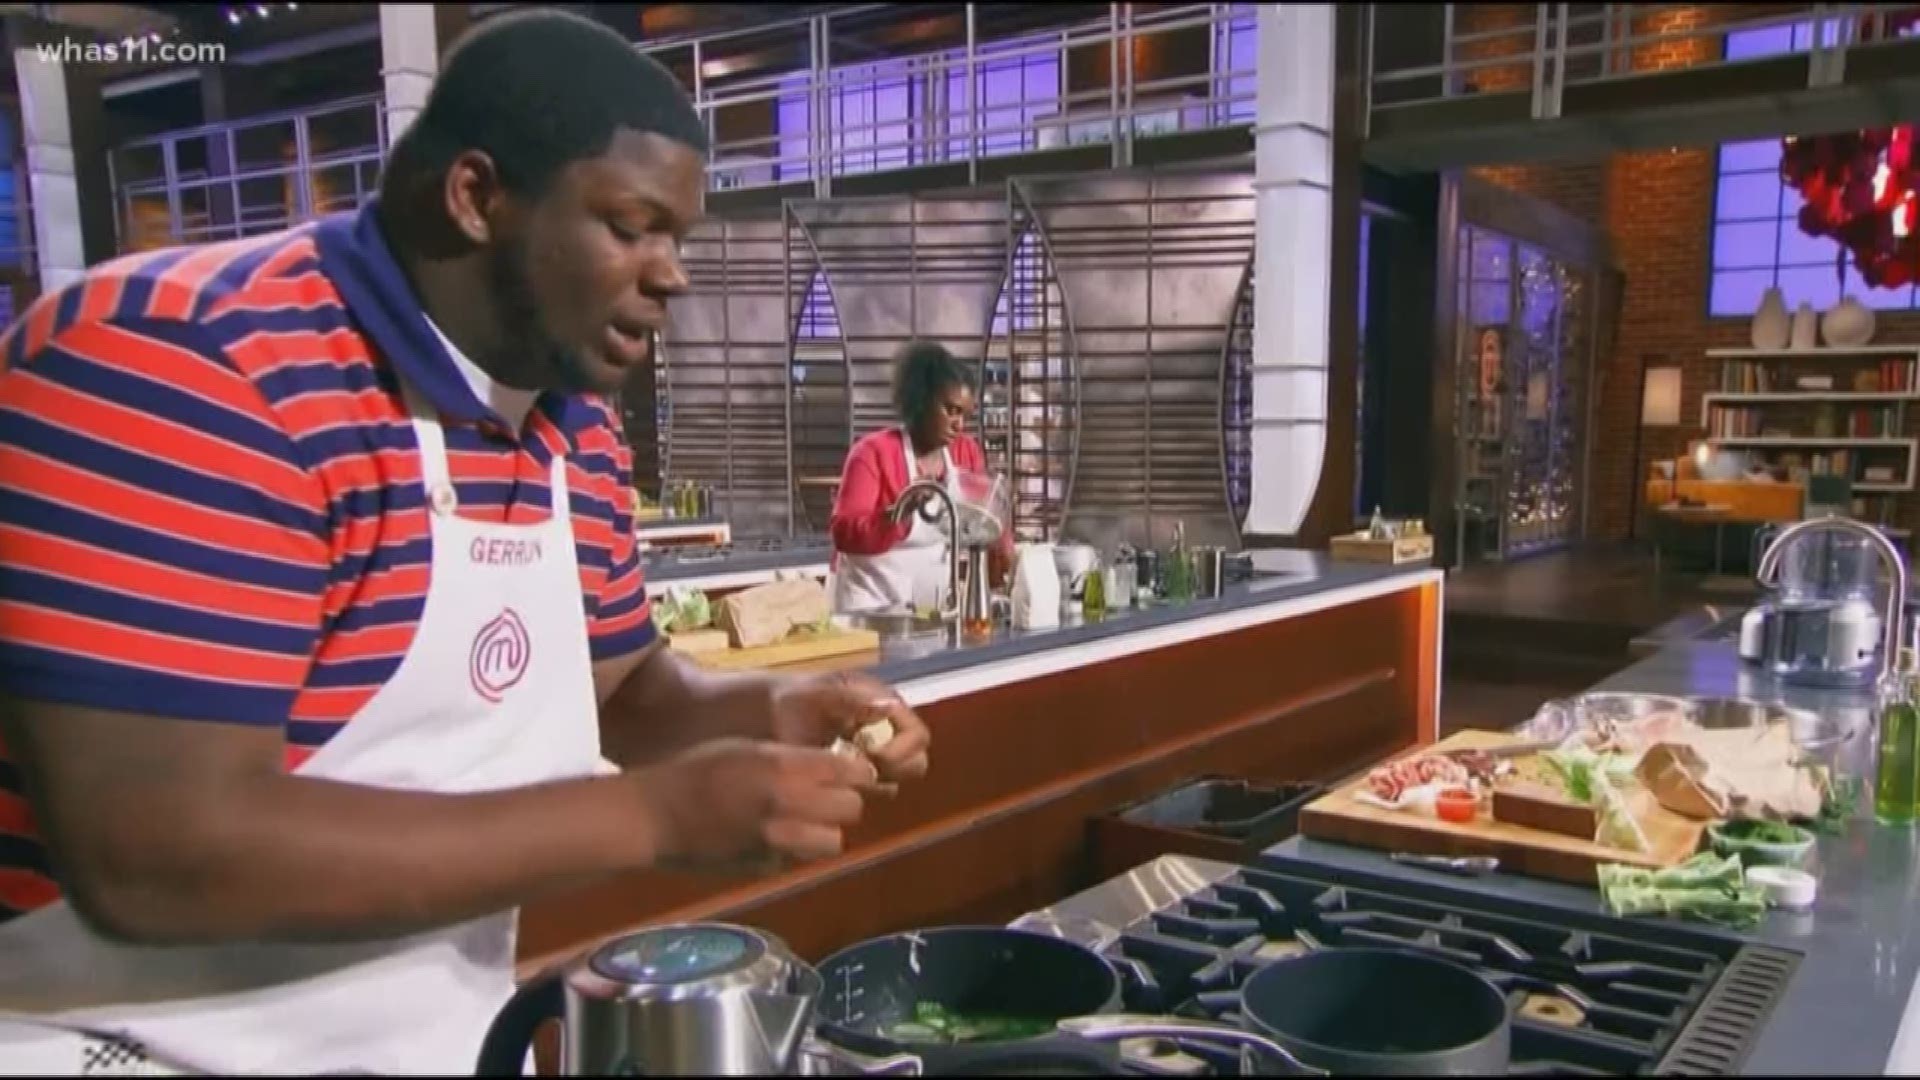 Gerron Hurt won Season 9 of the cooking competition in Wednesday's finale